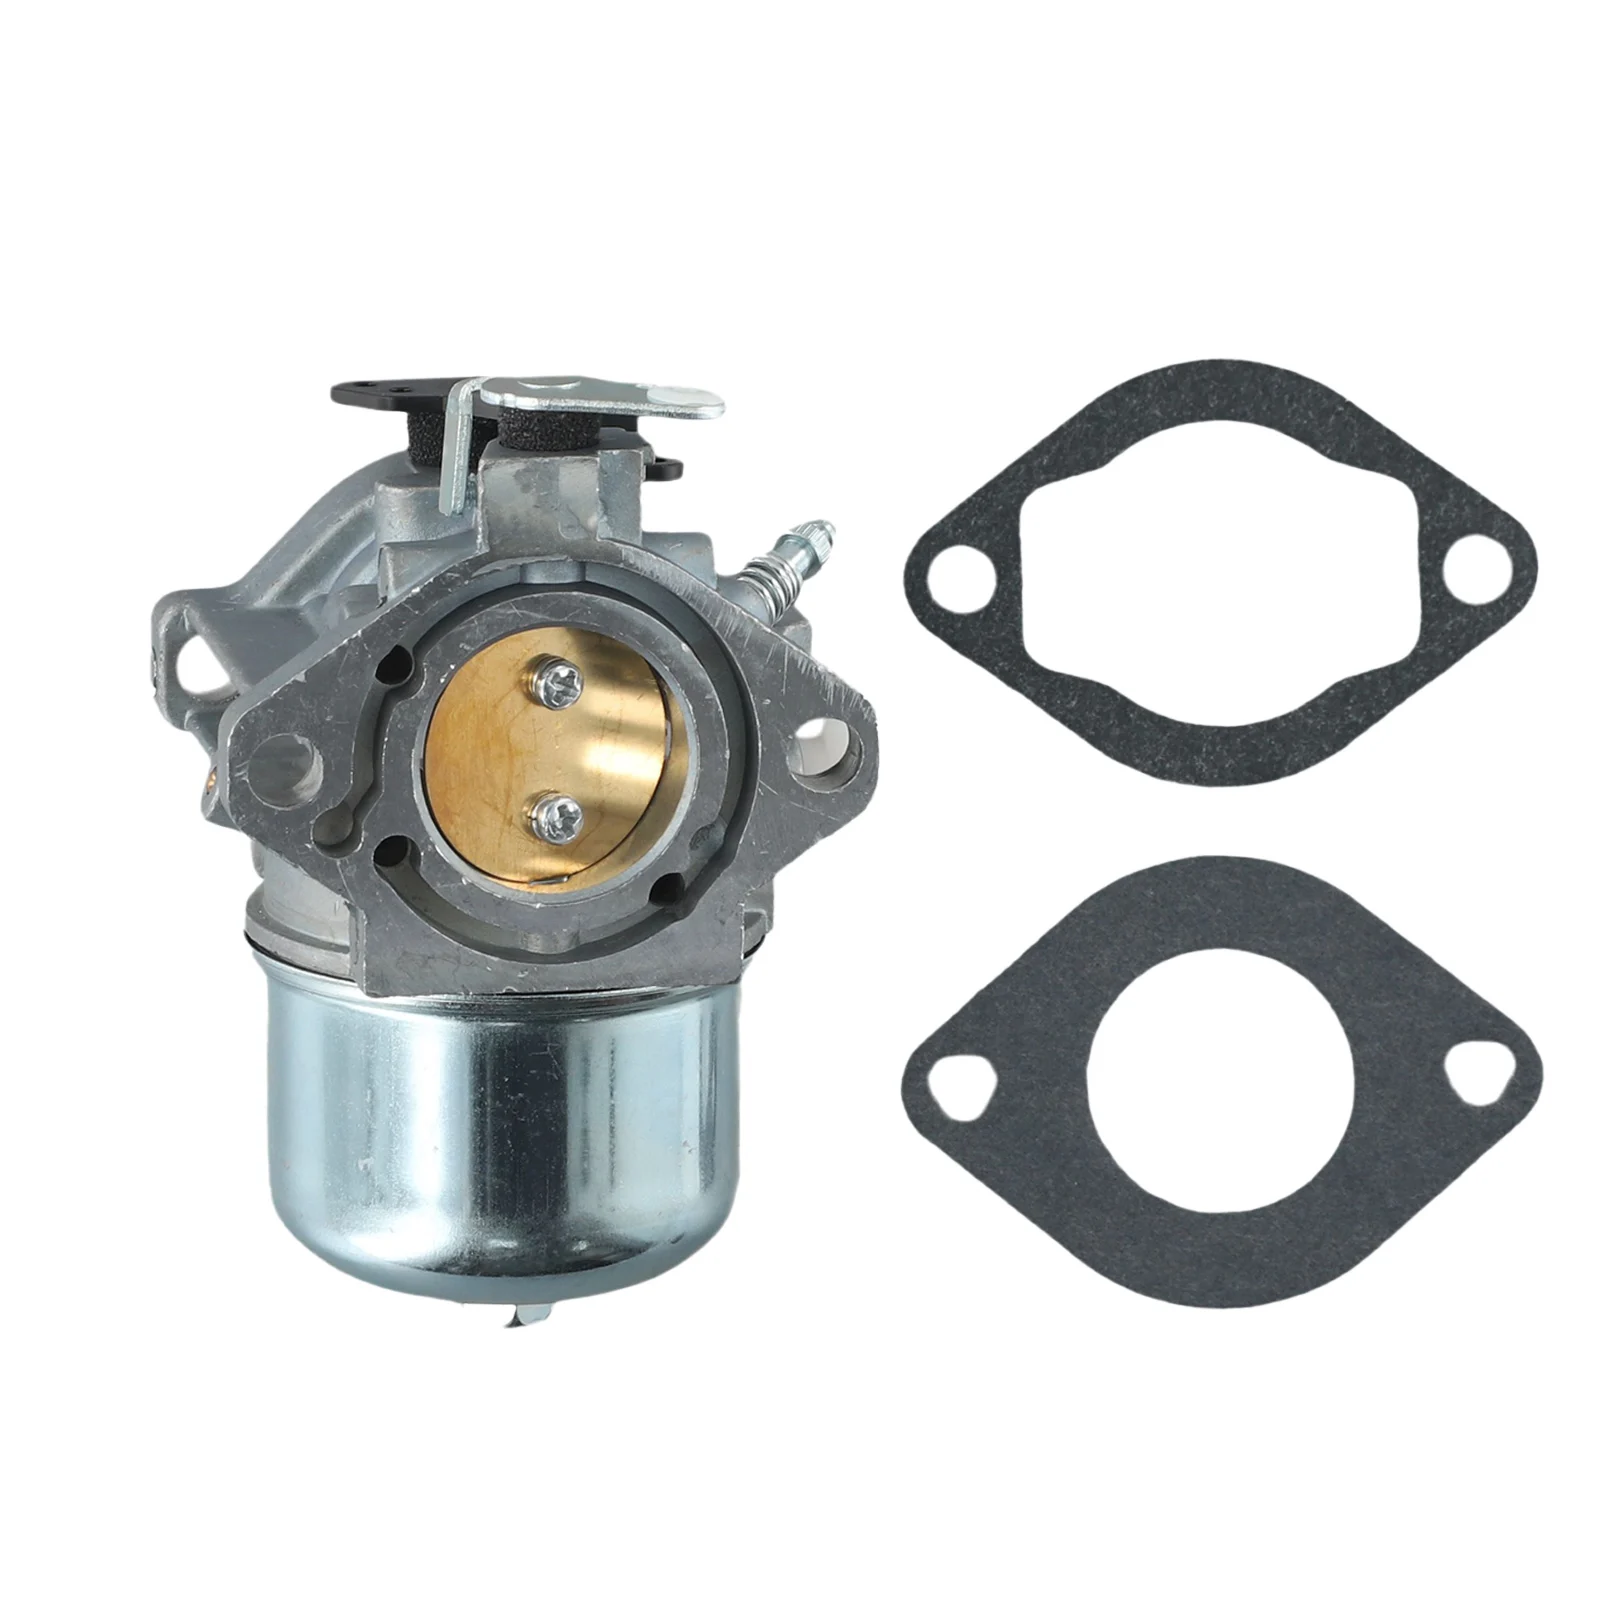 

Carburetor Carburetor Kit Spare Parts 498888 LMT 5-4993 Mower Replacement 12.5 Hp 799728 Accessories Carby Fittings